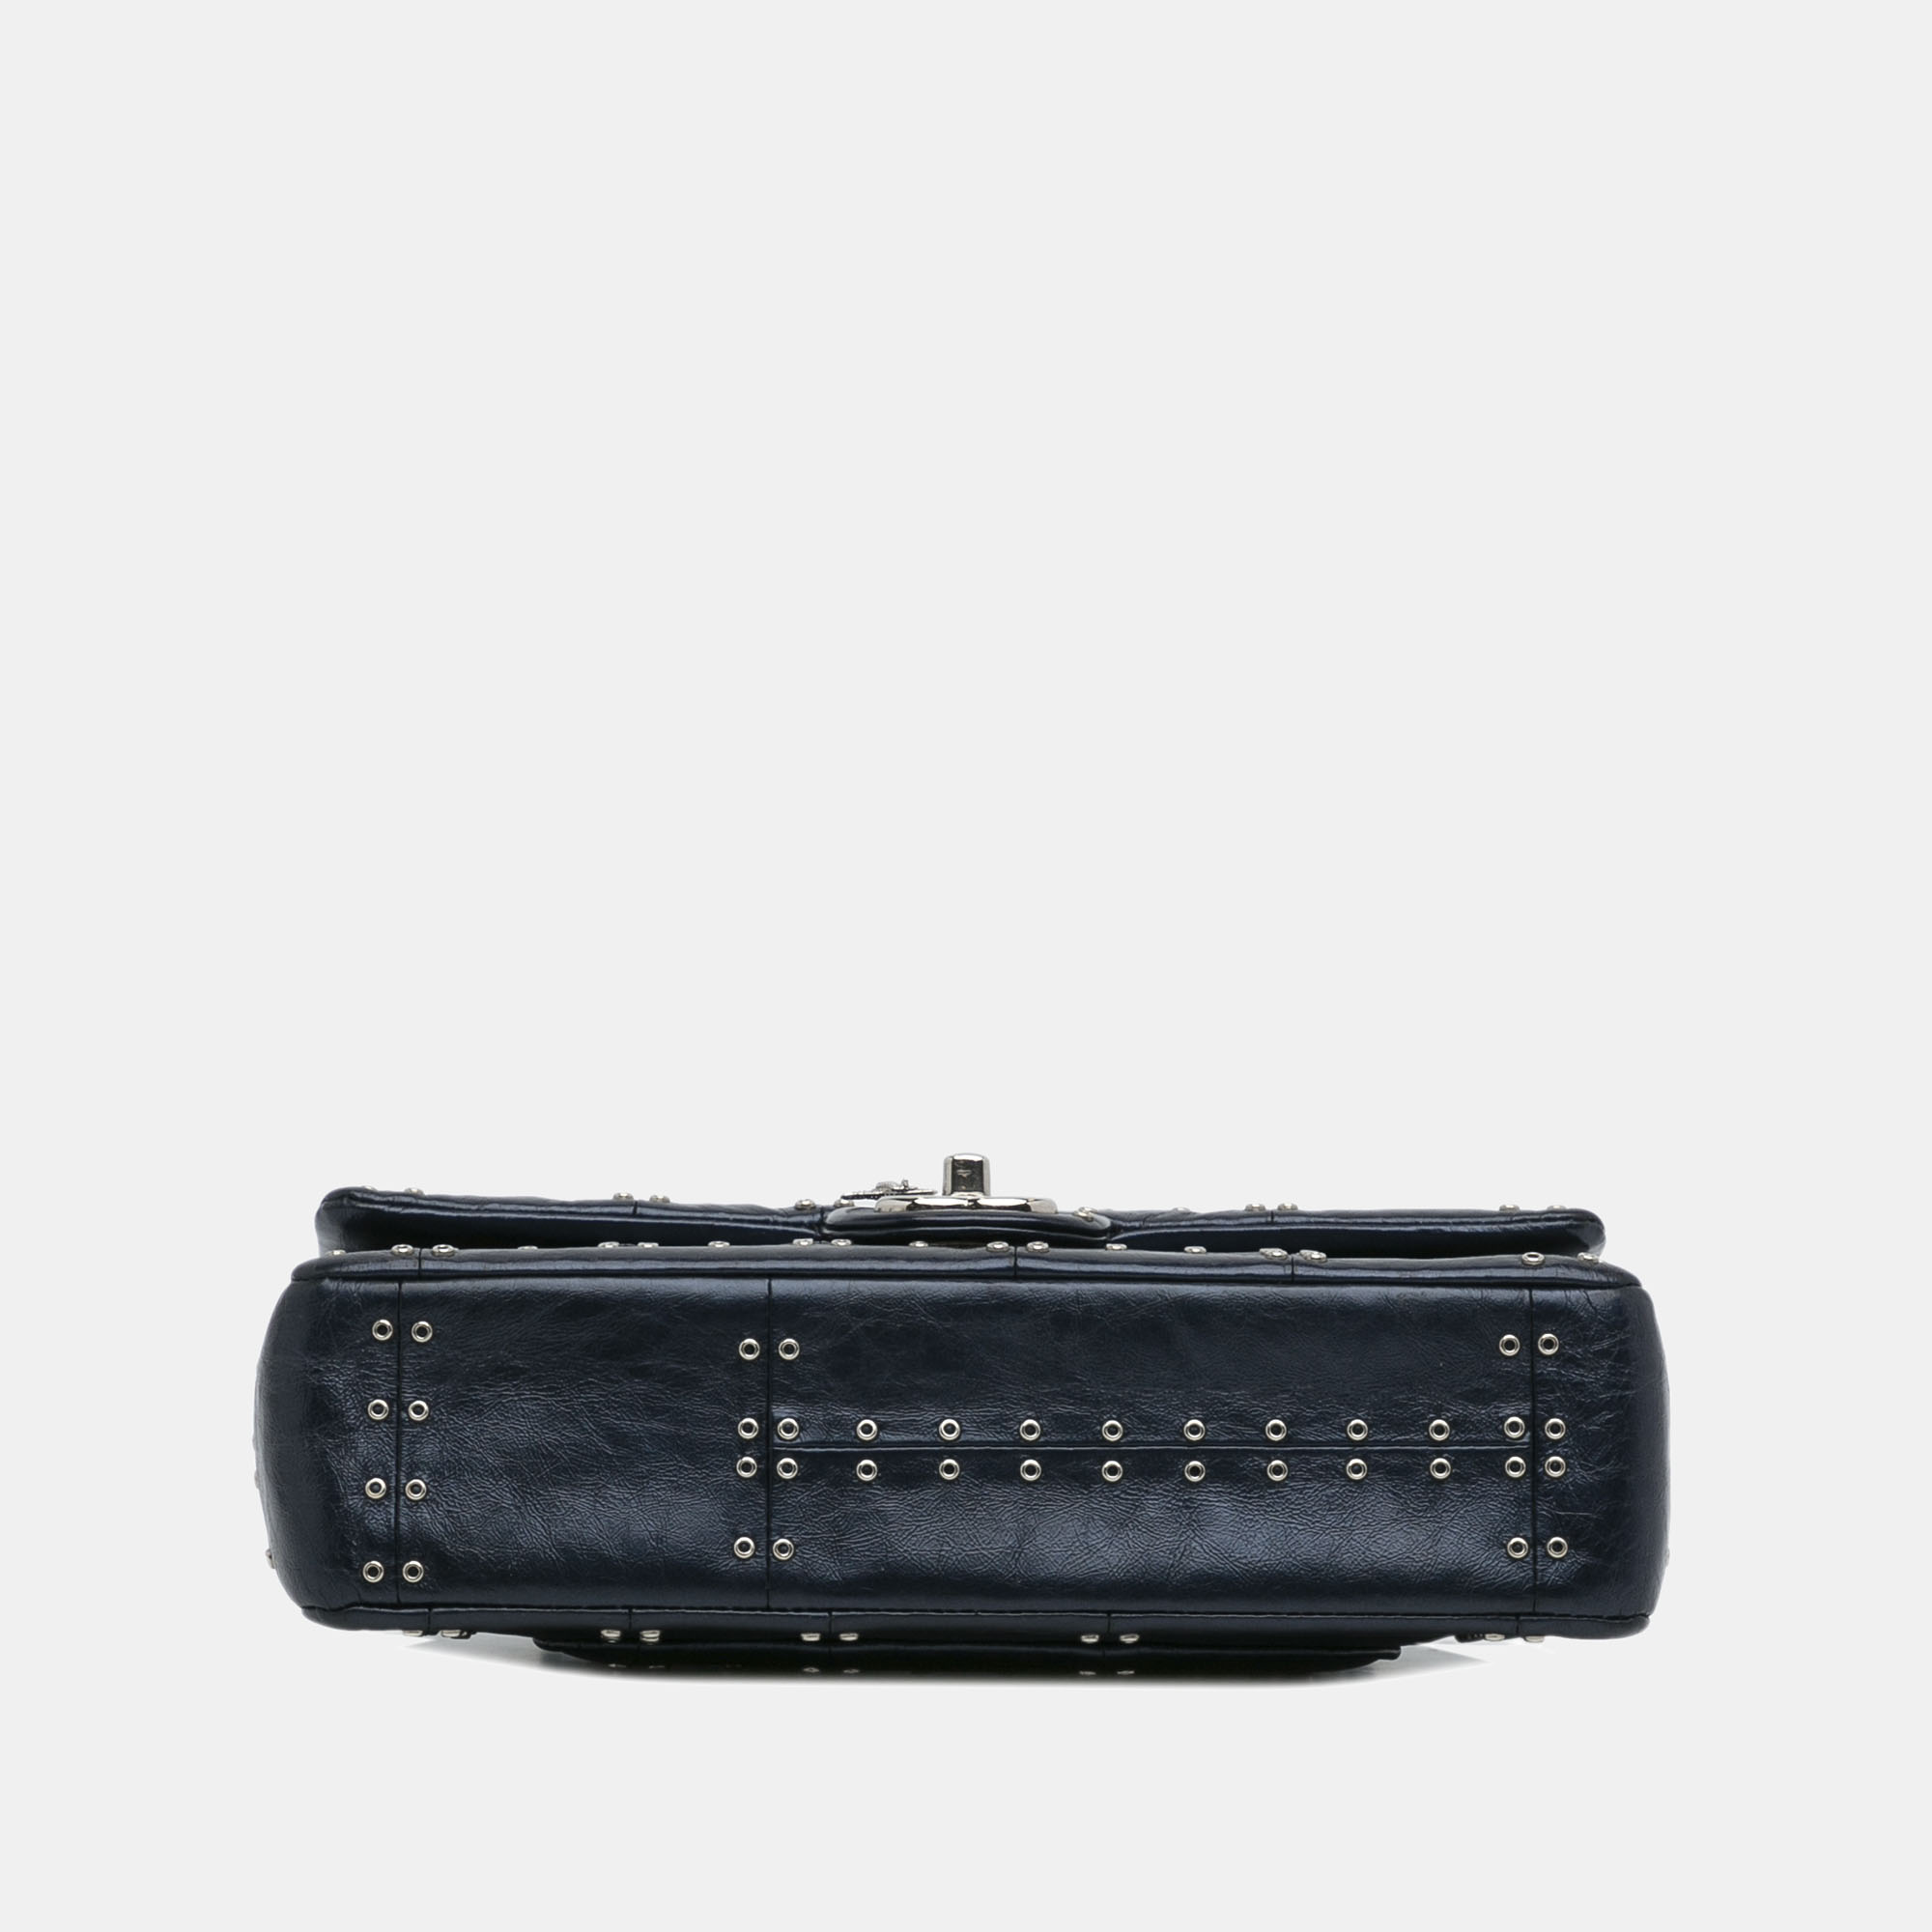 Chanel Medium Studded Leather Airlines Double Flap